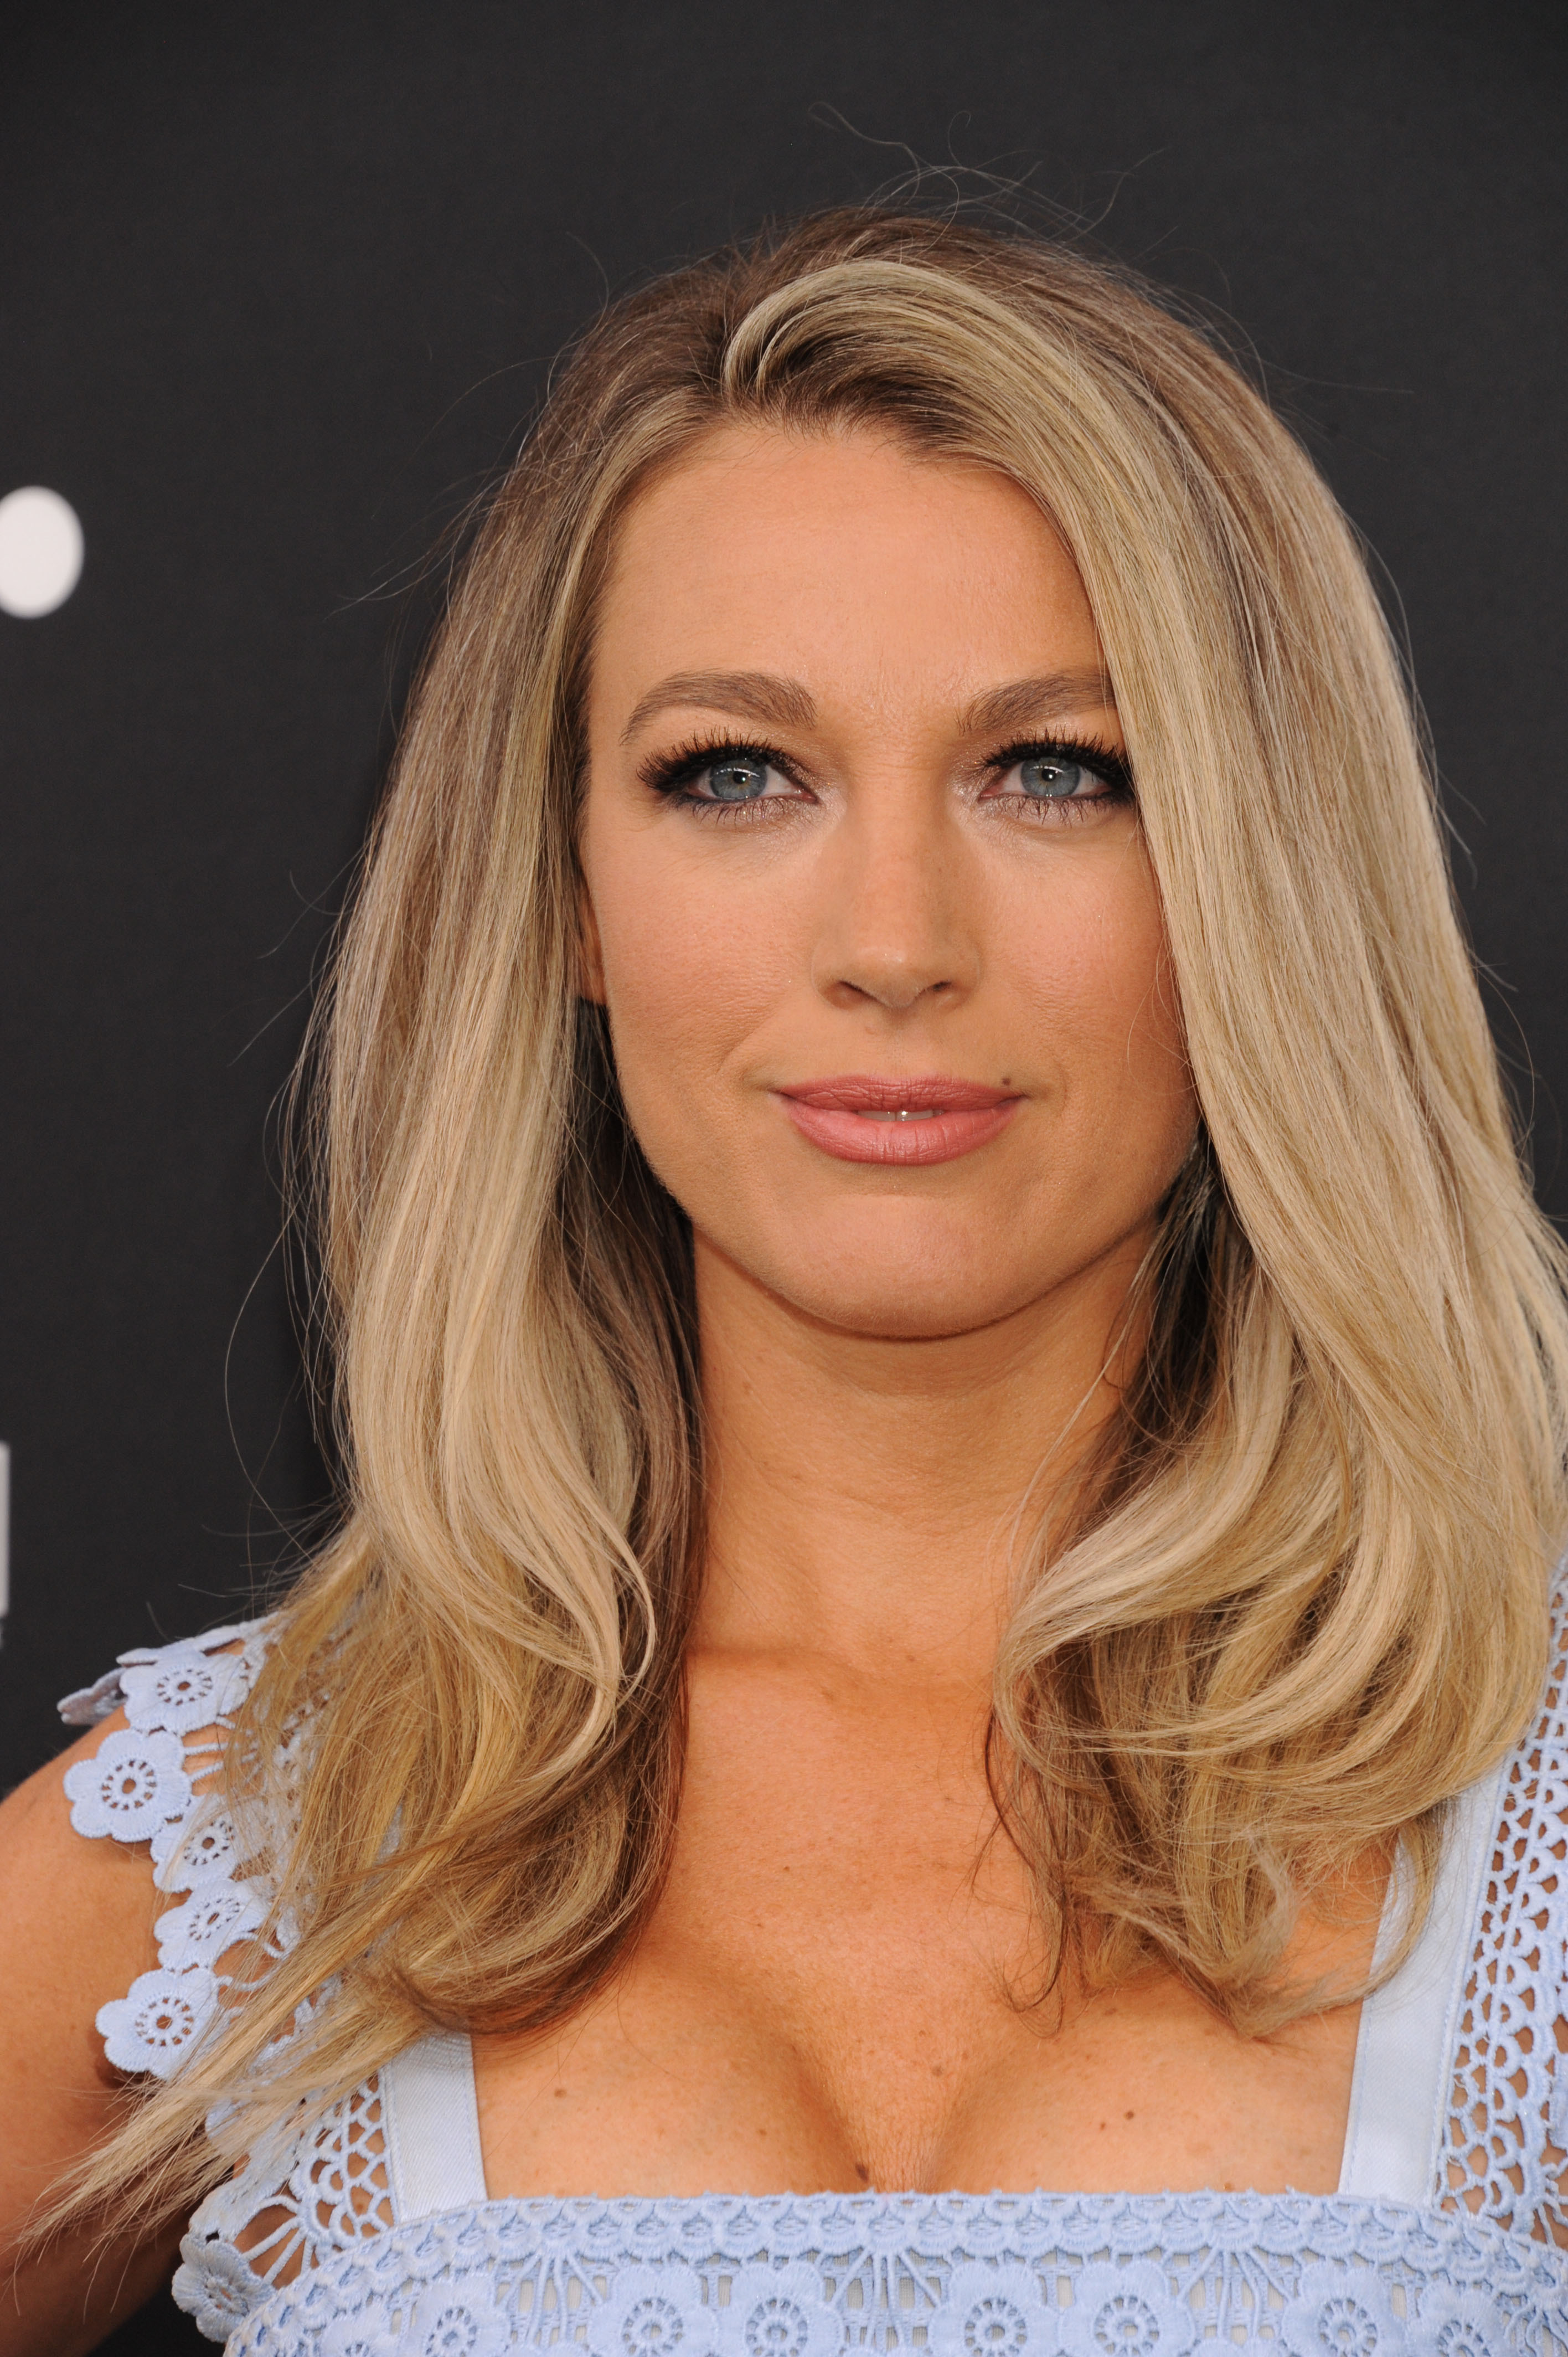 How tall is Natalie Zea?